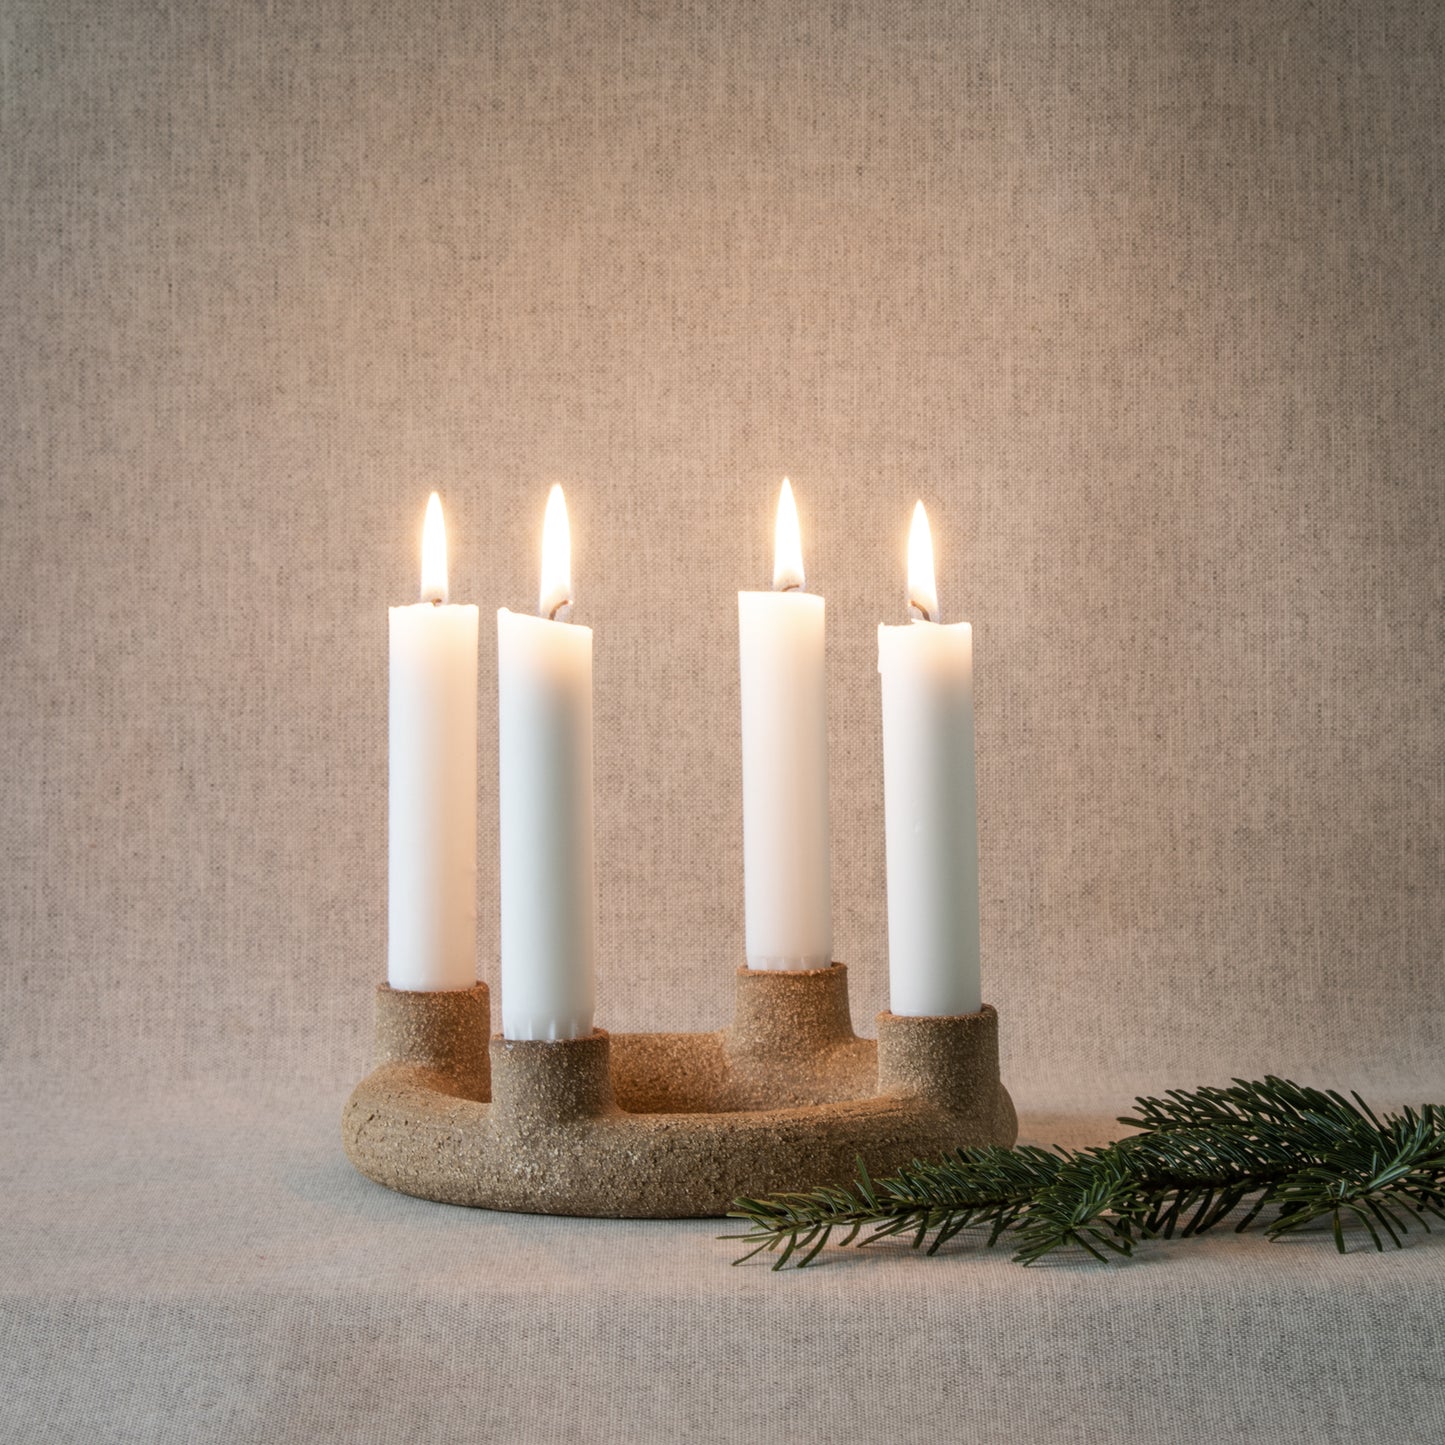 Candlestick Ring, 4 candles - Advent candlestick